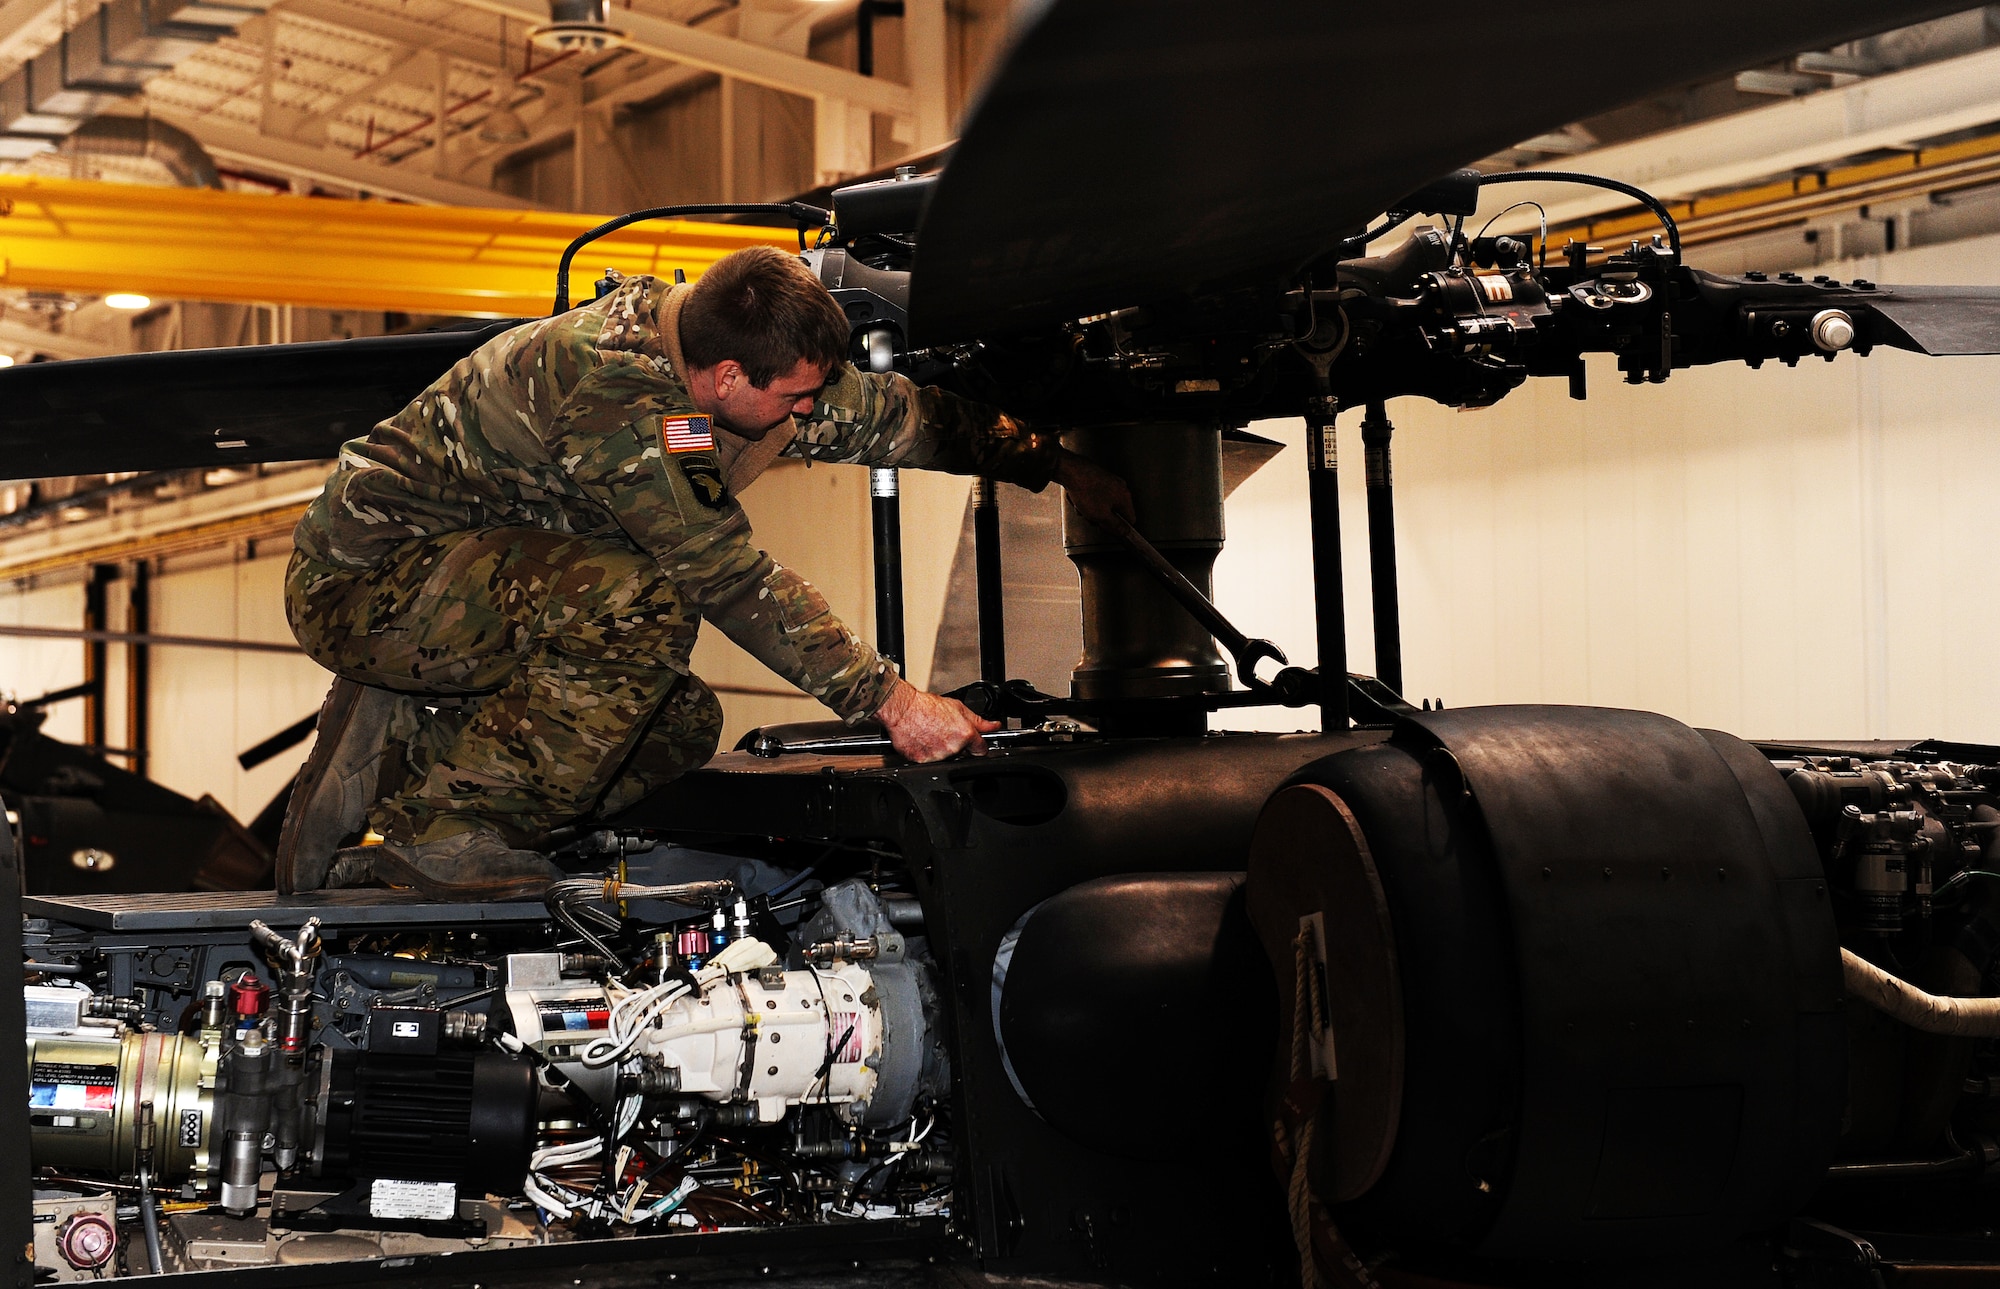 Missouri Army National Guard Staff Sgt. Keith Neiman, a crew chief assigned to the 1-135th Attack Reconnaissance Battalion Army Aviation Support Facility #1, performs routine maintenance on a UH-60 Black Hawk utility helicopter at Whiteman Air Force Base, Mo., April 1, 2016. More than 90 enlisted aircraft maintainers, who previously only worked on the AH-64 Apache, are in the process of certifying to perform maintenance on Black Hawks following the helicopter’s recent arrival. (U.S. Air Force photo by Airman 1st Class Michaela R. Slanchik)